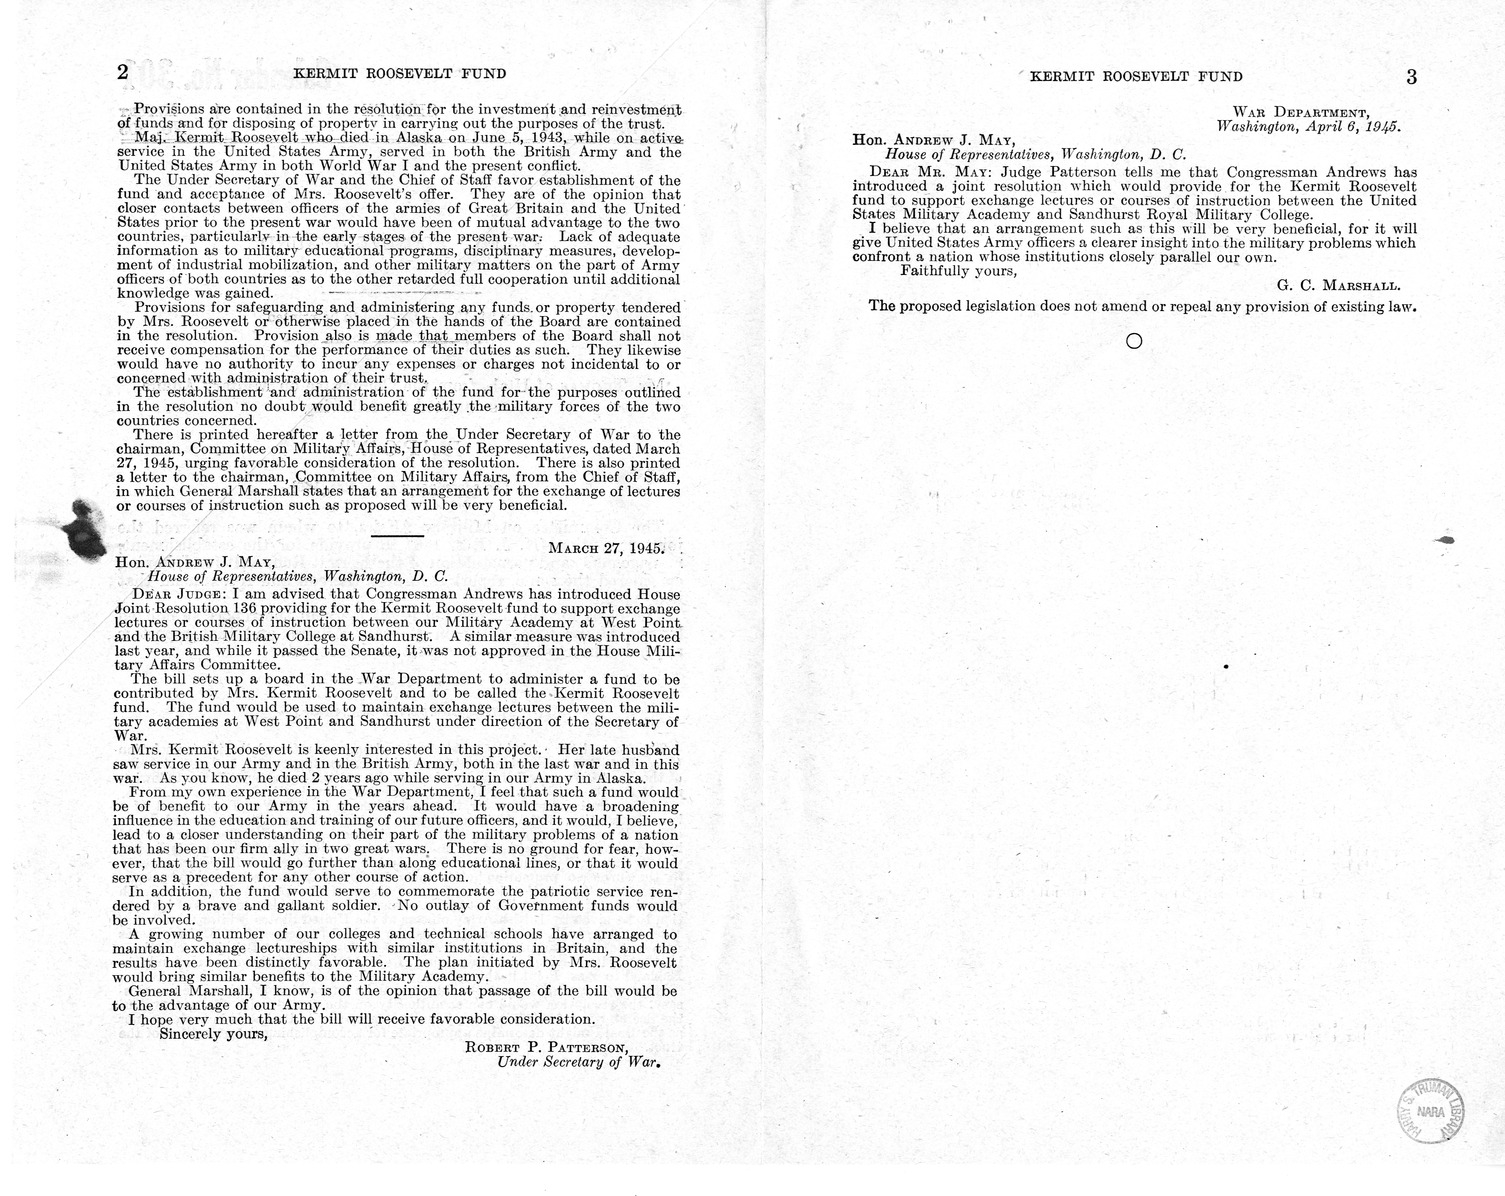 Memorandum from Frederick J. Bailey to M. C. Latta, H.J. Res. 136, To Provide for the Establishment, Management and Perpetuation of the Kermit Roosevelt Fund, with Attachments